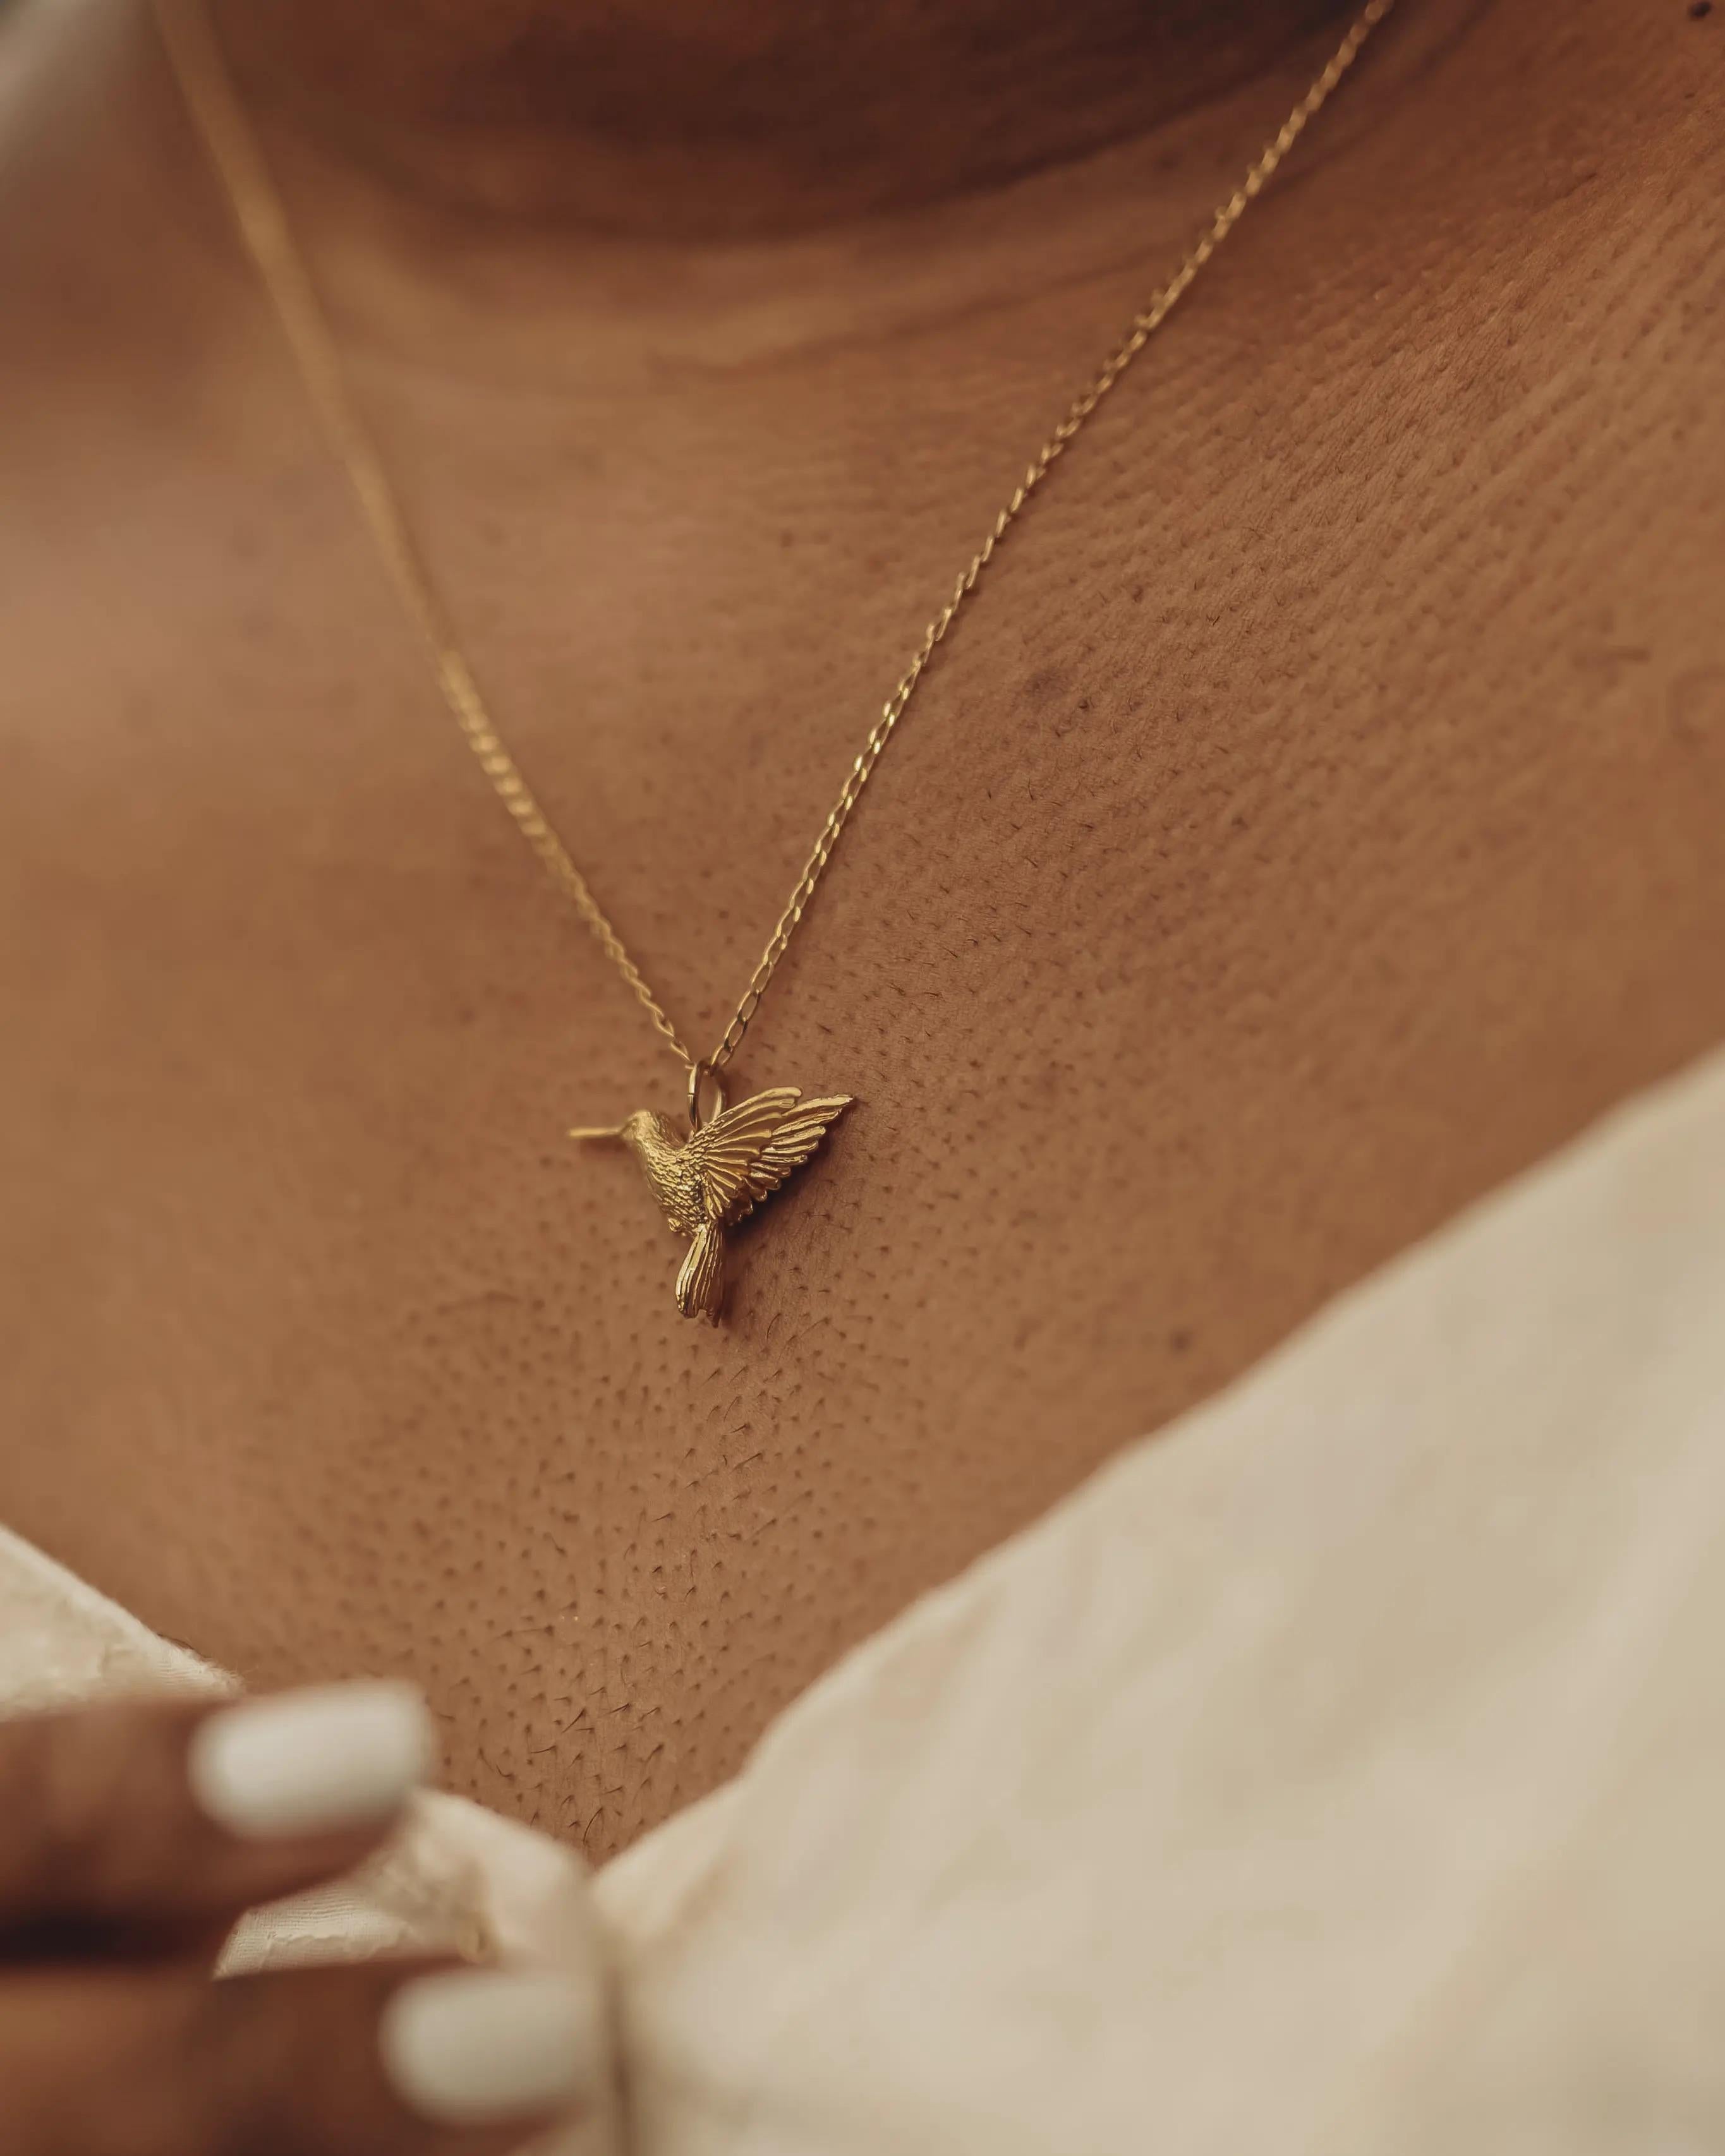 This detailed little hummingbird pendant is cast in solid 18 Carat gold and finished by hand, and is created from Lucy's original hand-sculpted design. 

This tiny hummingbird pendant is made in London, United Kingdom using recycled or Fairtrade